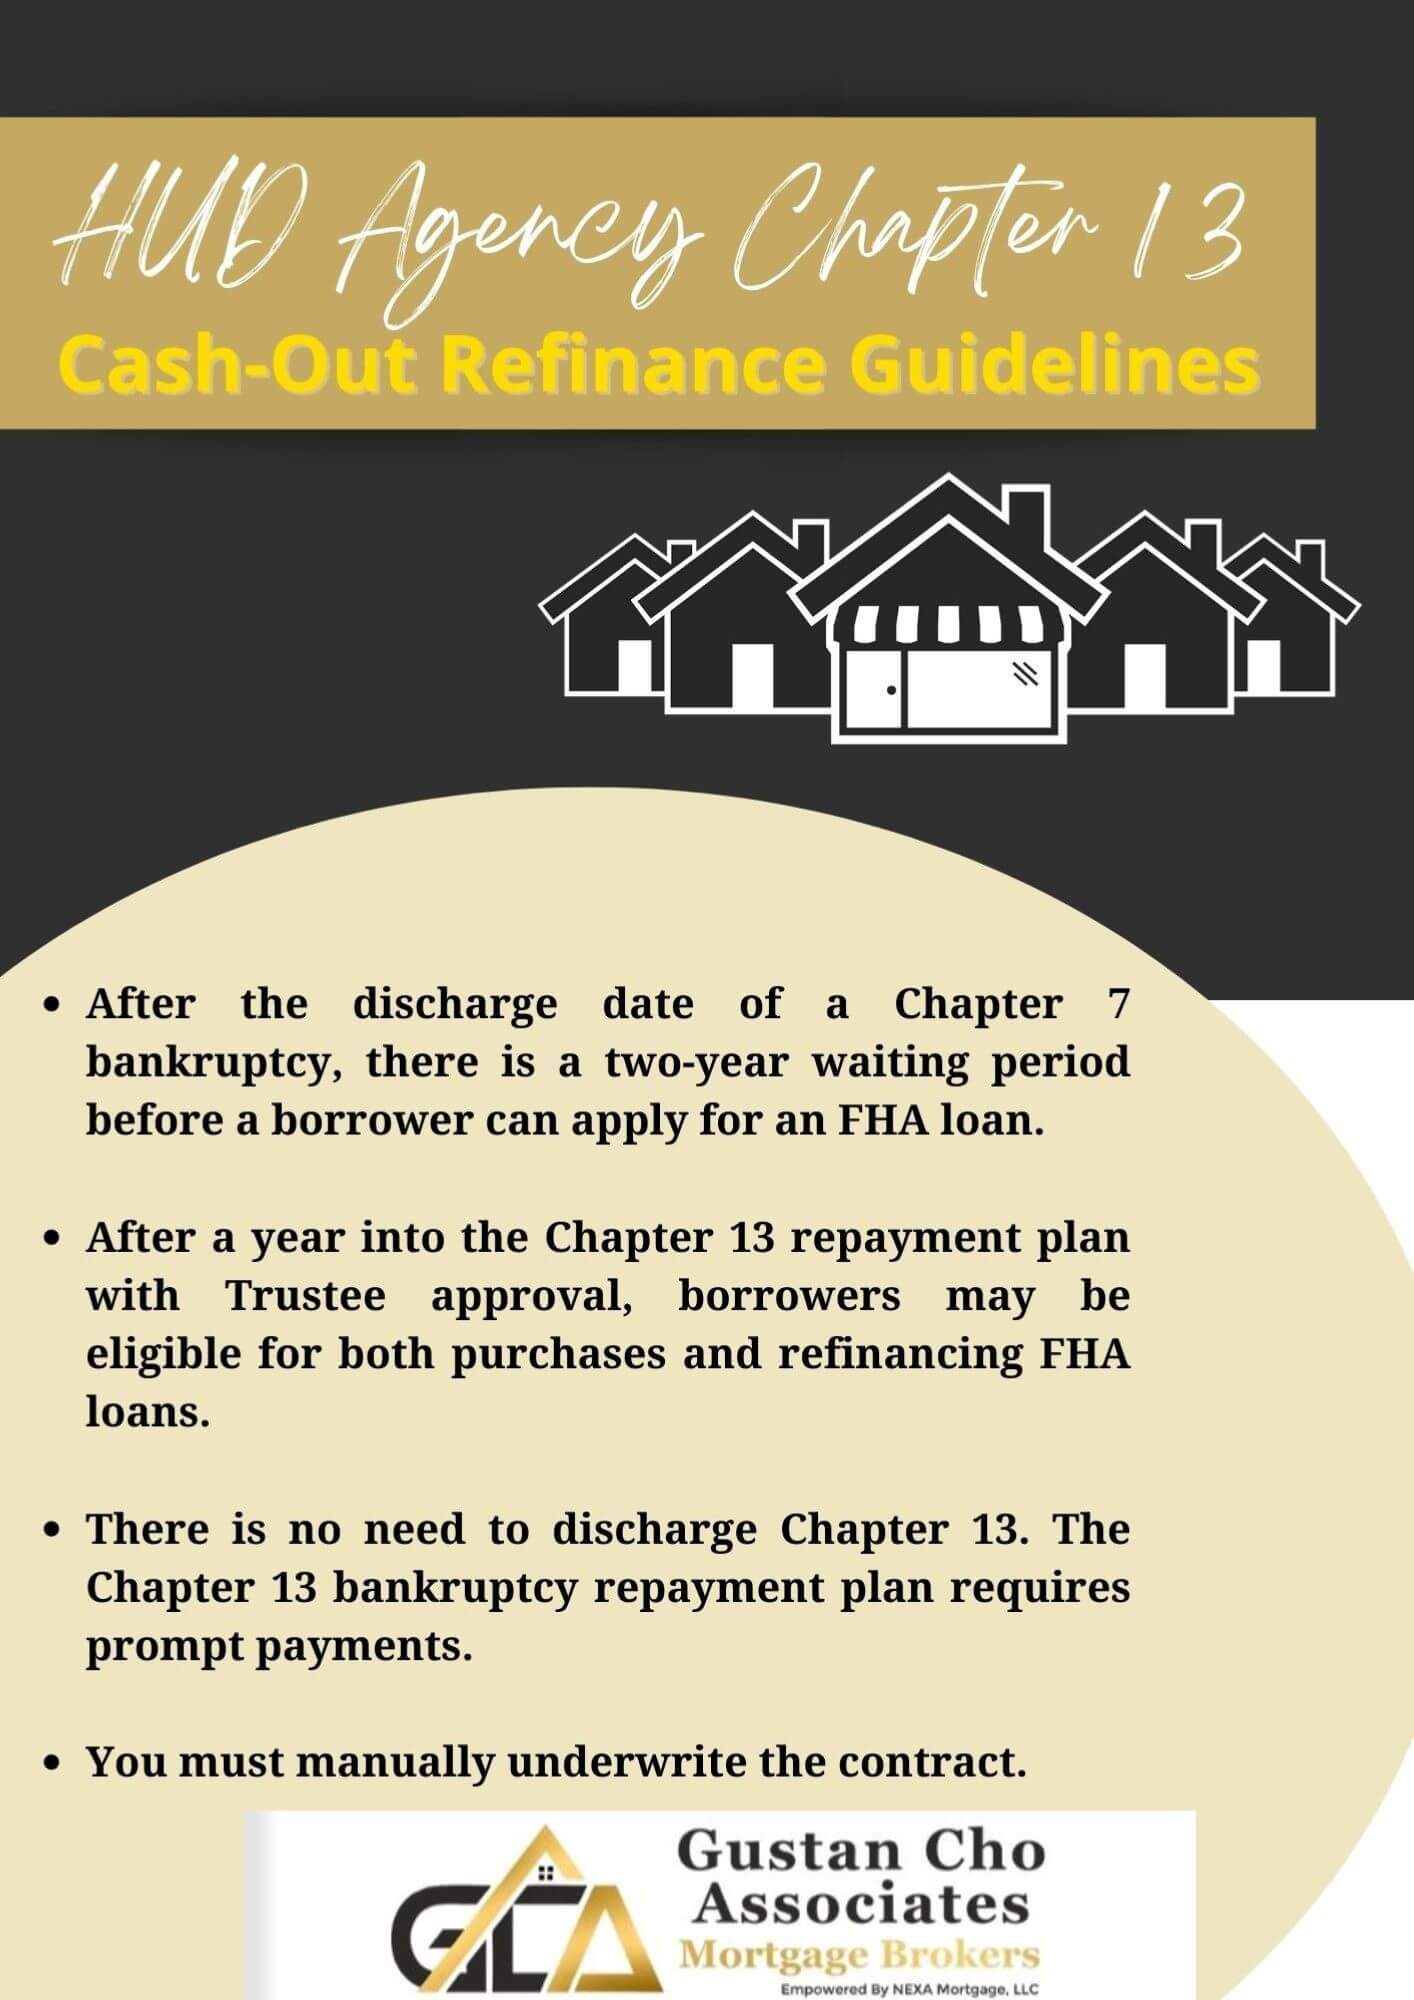 HUD Agency Chapter 13 Cash-Out Refinance Guidelines 